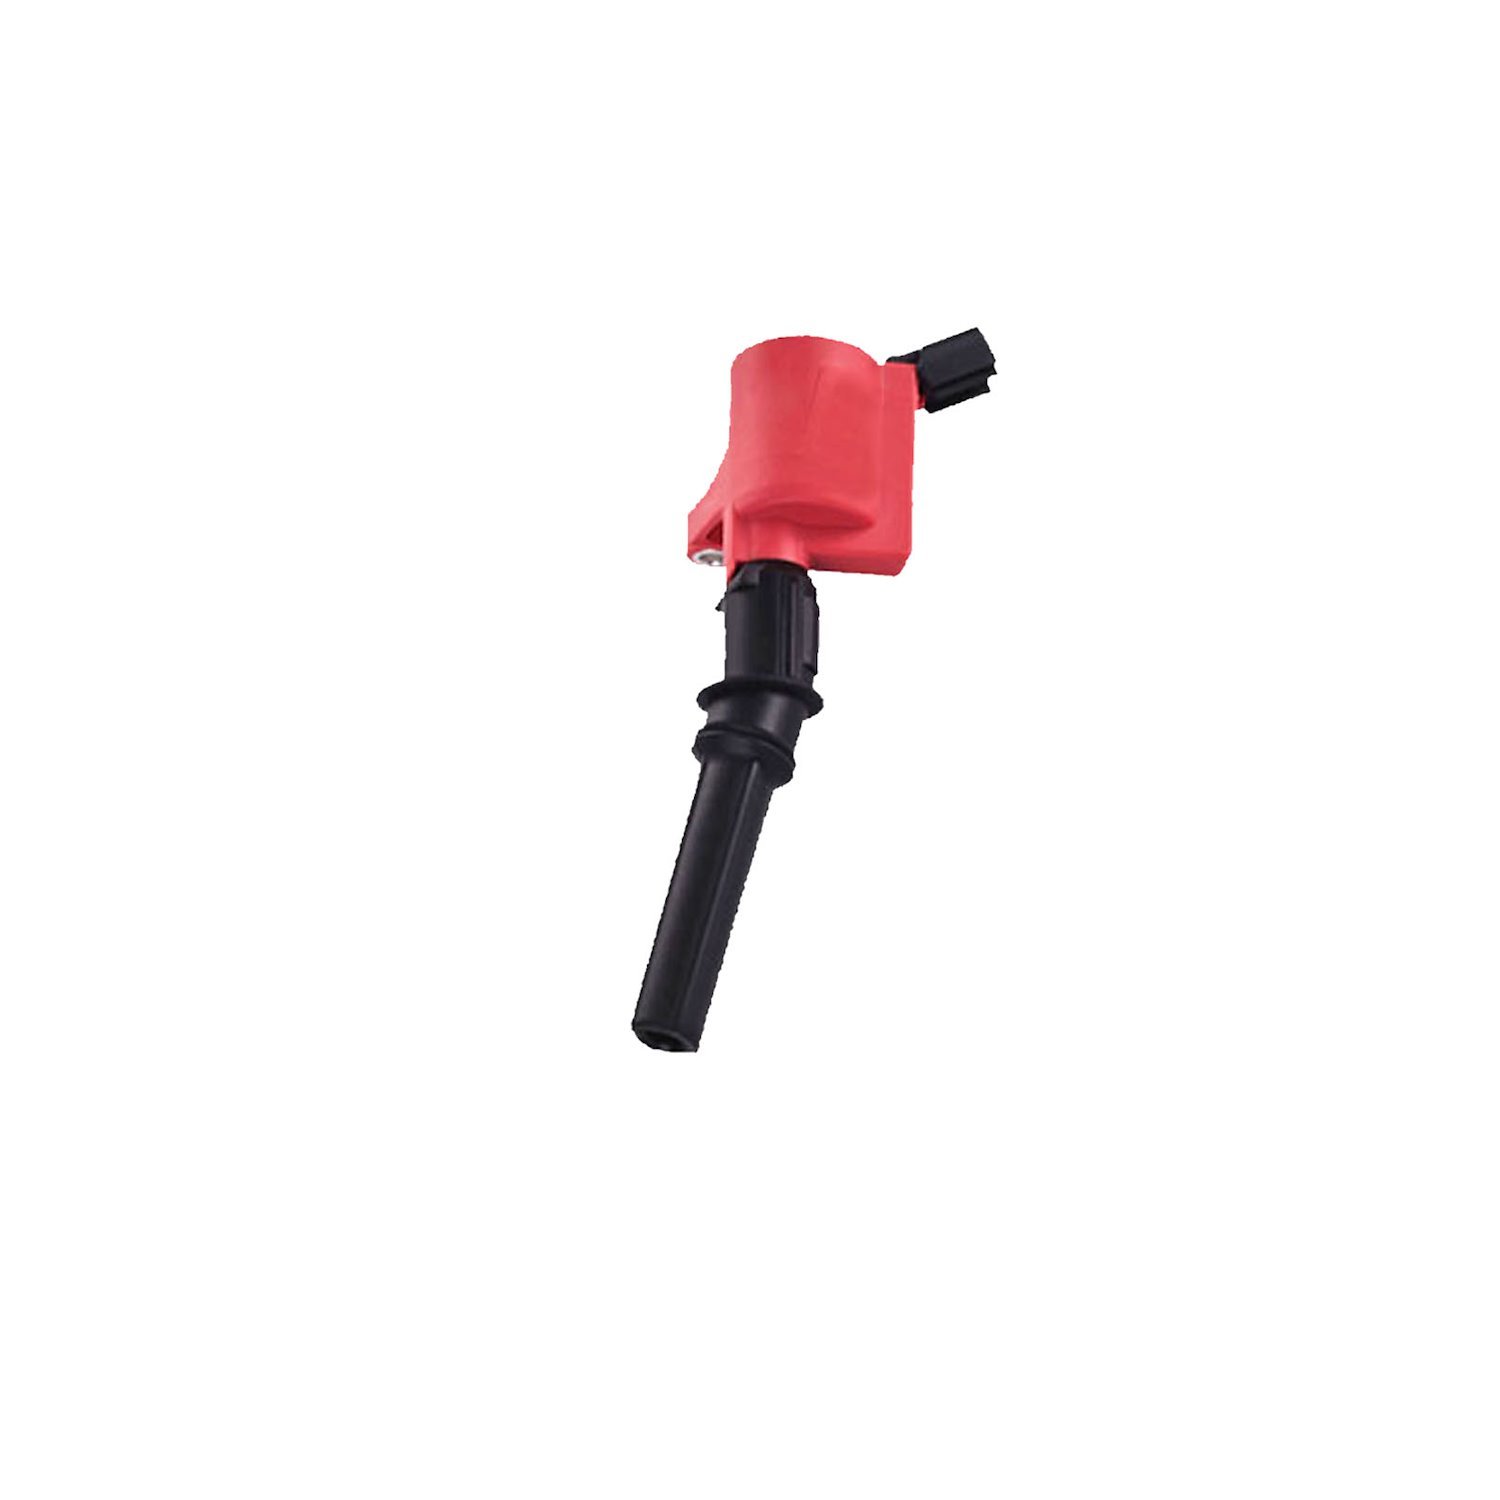 High-Performance Ignition Coil for 1998-2008 Ford F-150/E-150/Expedition [Red]